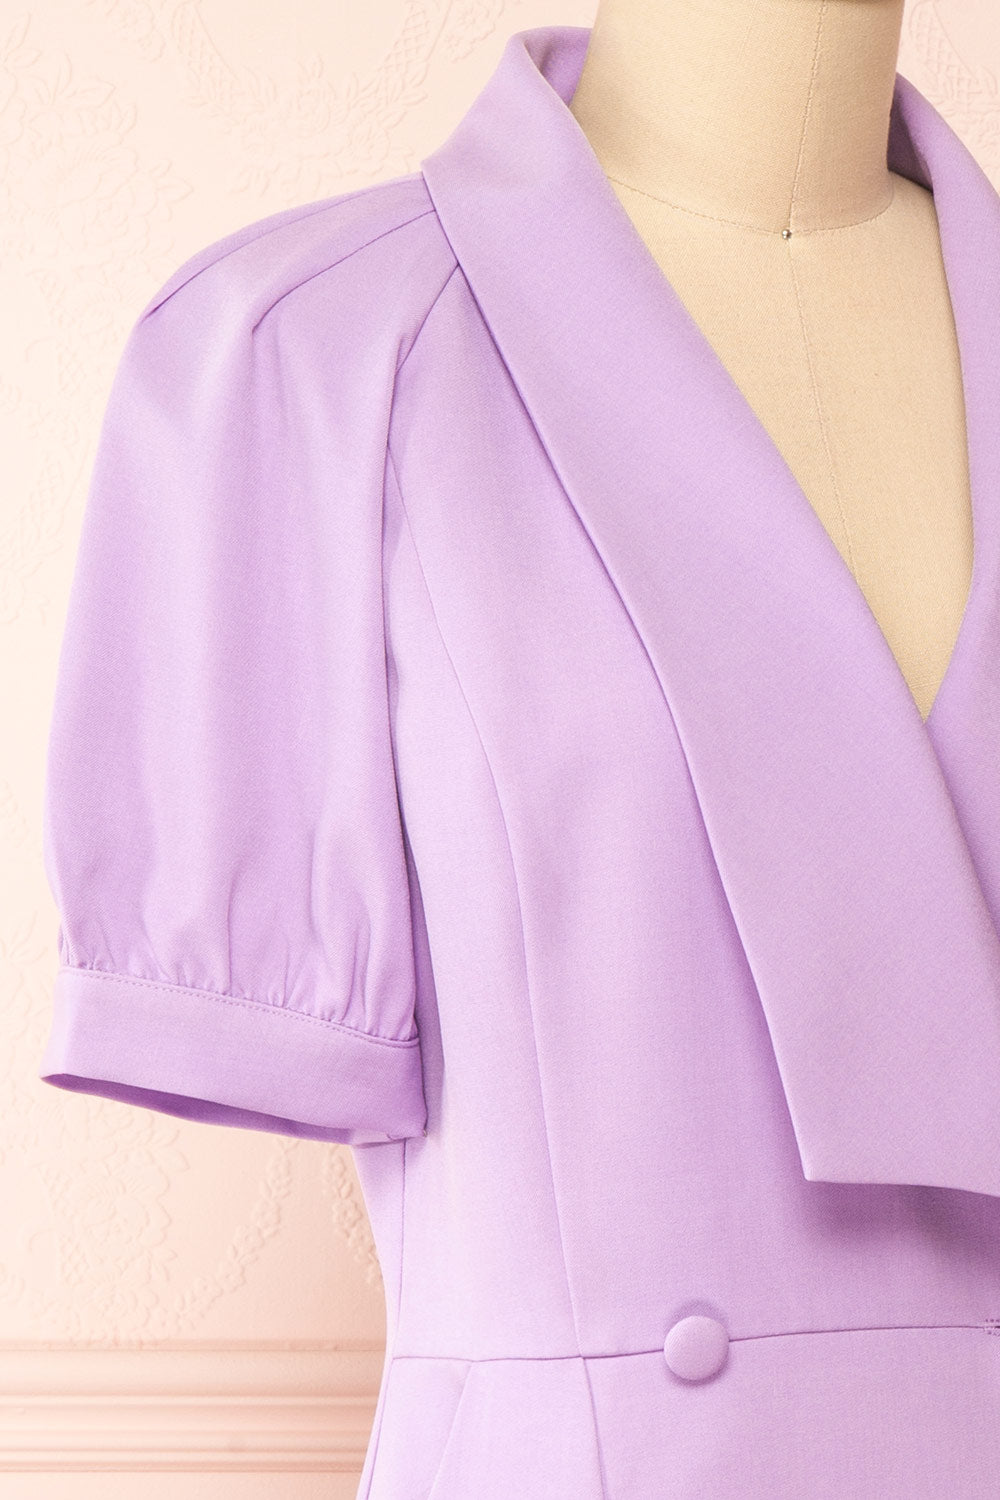 Lidie Short Lilac Tailored Dress | Boutique 1861 side close-up